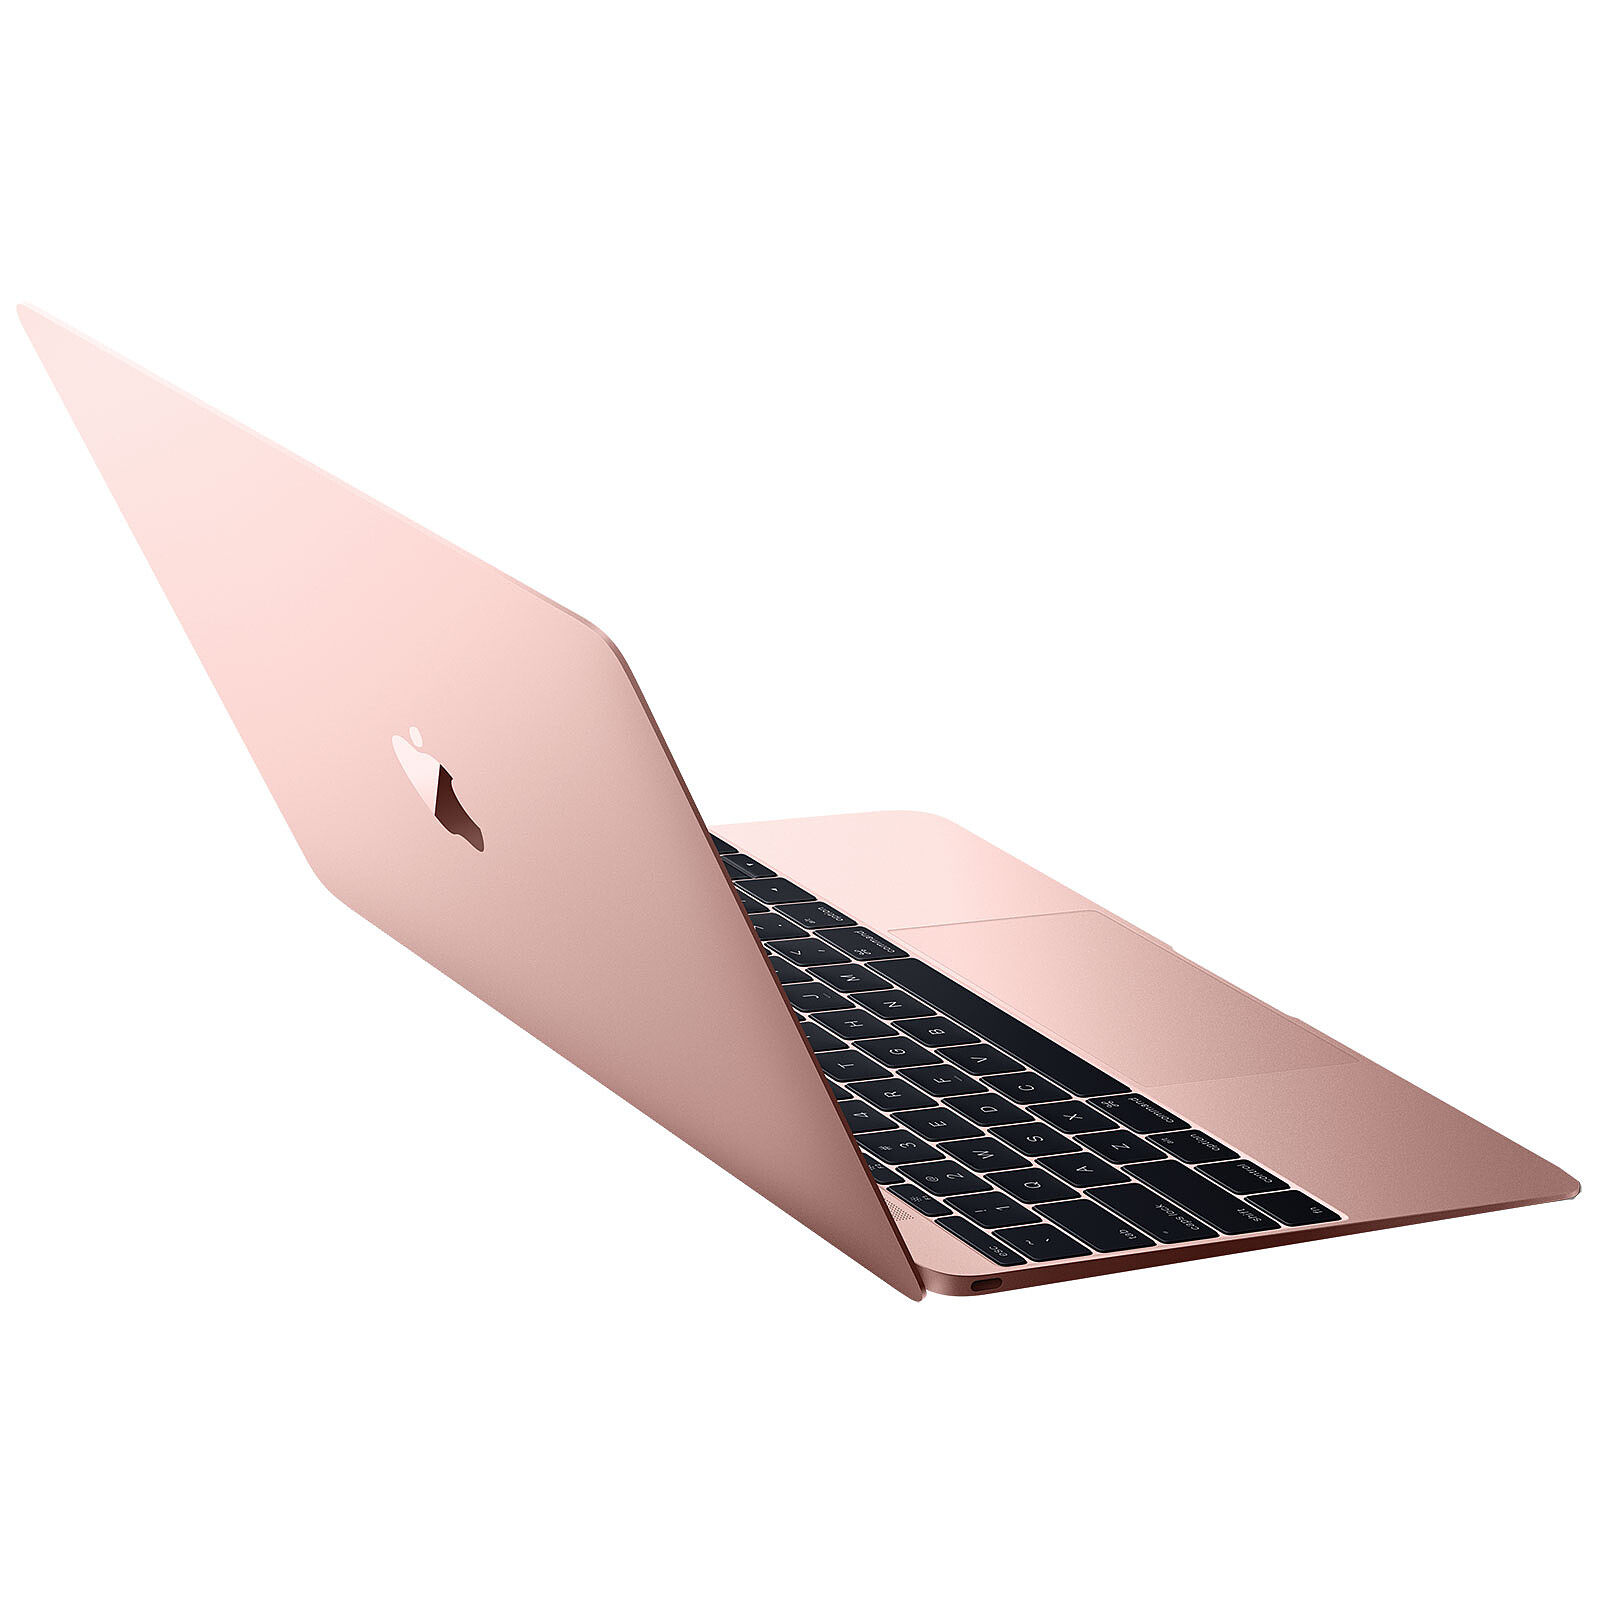 Apple MacBook 12 Or rose (MMGL2FN/A) · Reconditionné